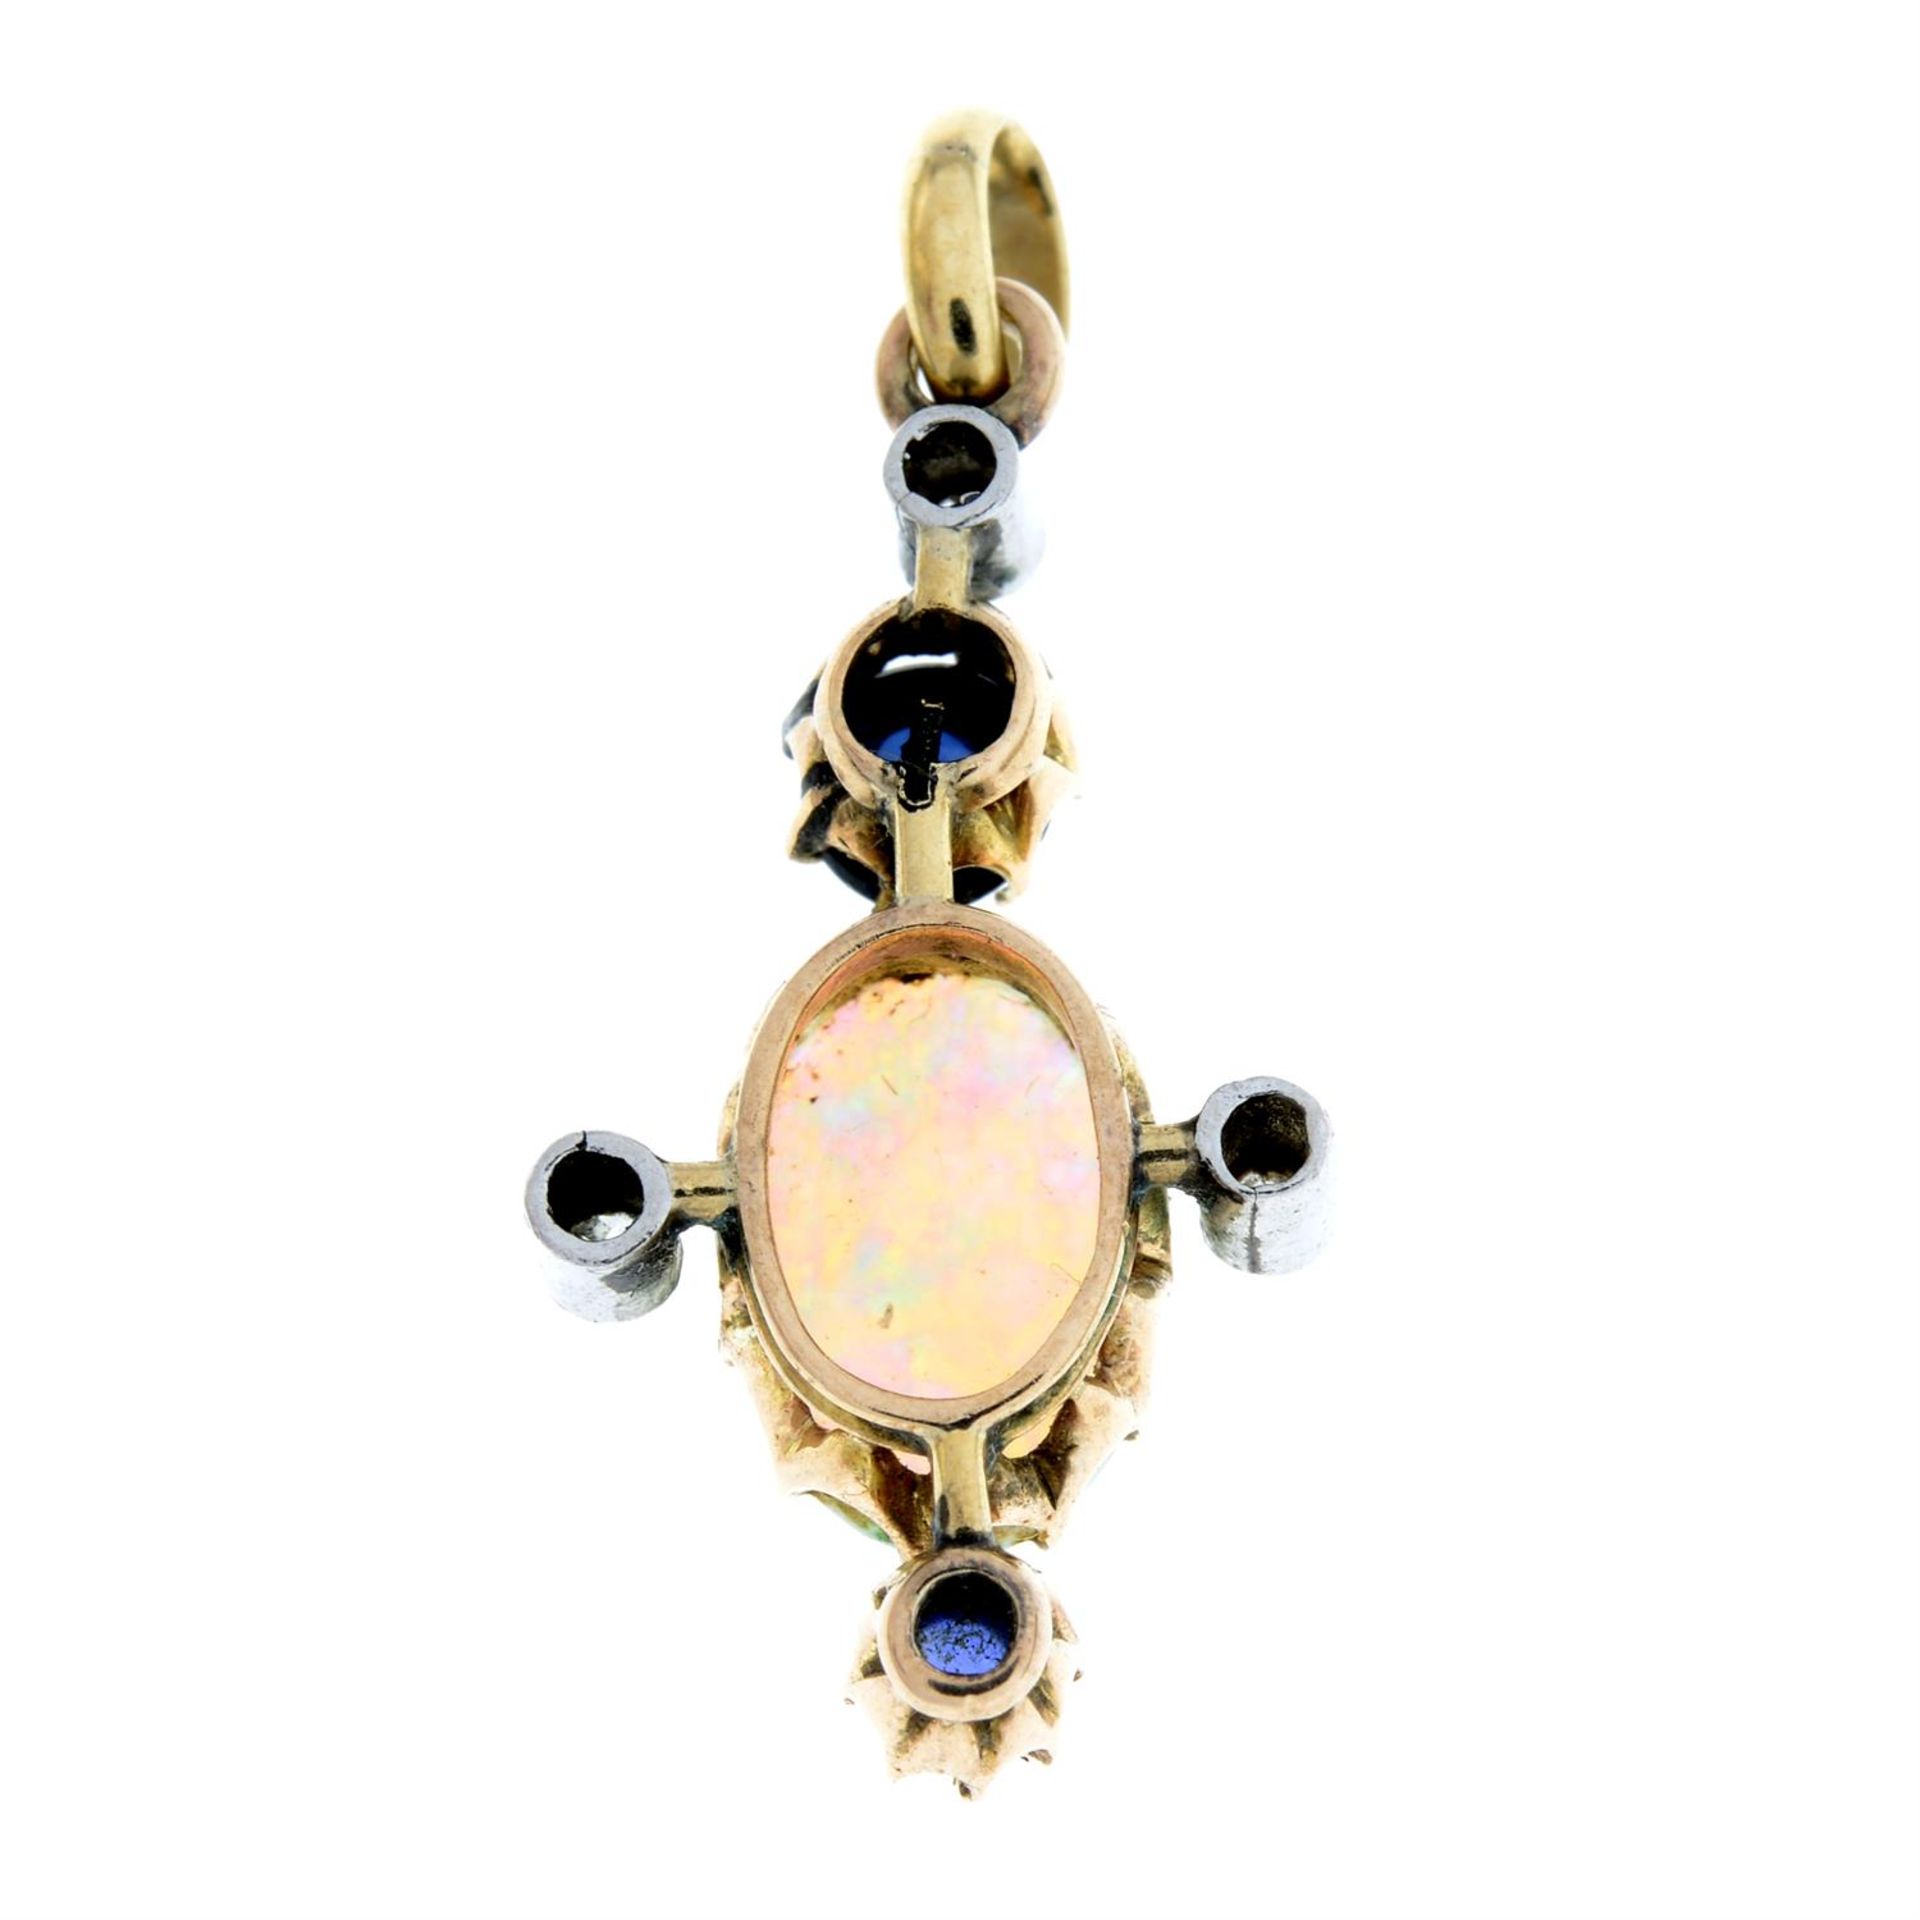 An early 20th century gold opal, diamond and sapphire pendant. - Image 2 of 2